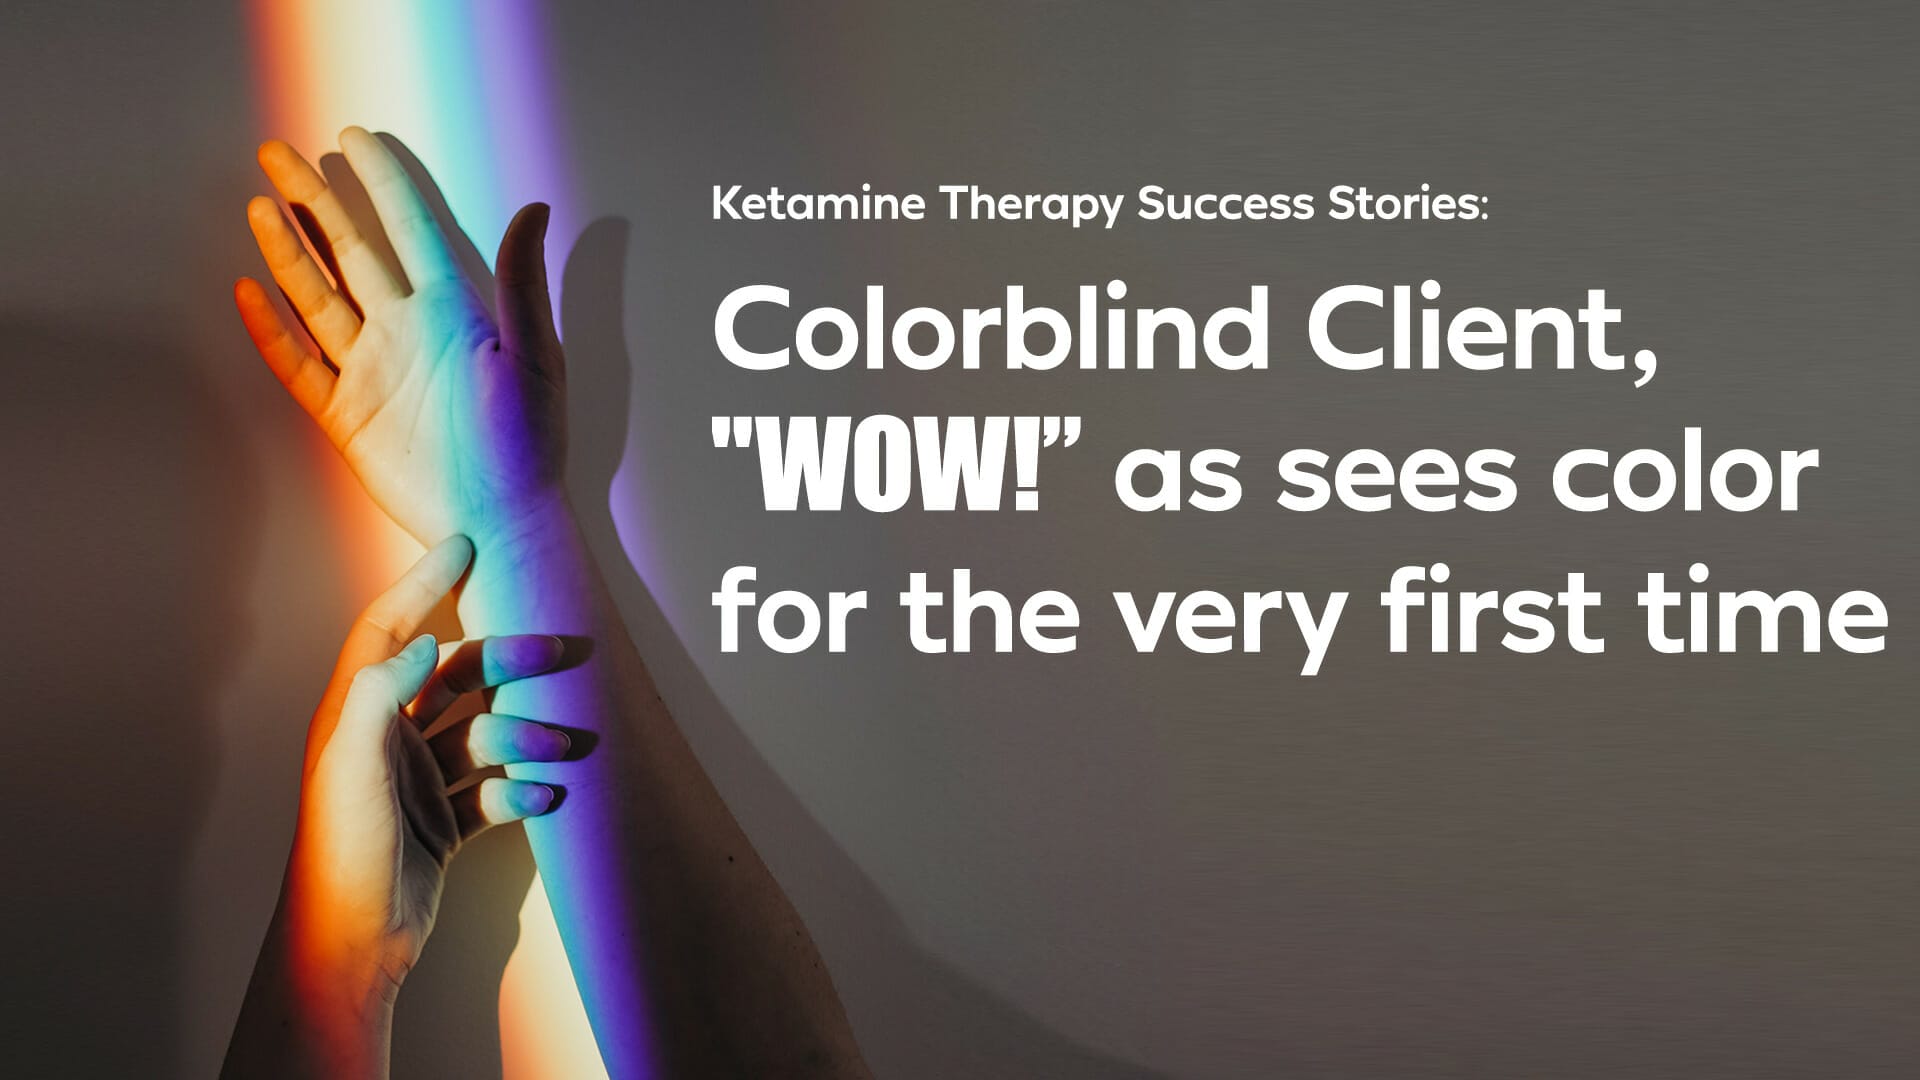 Ketamine Therapy Success Stories: Colorblind Client sees color for the first time